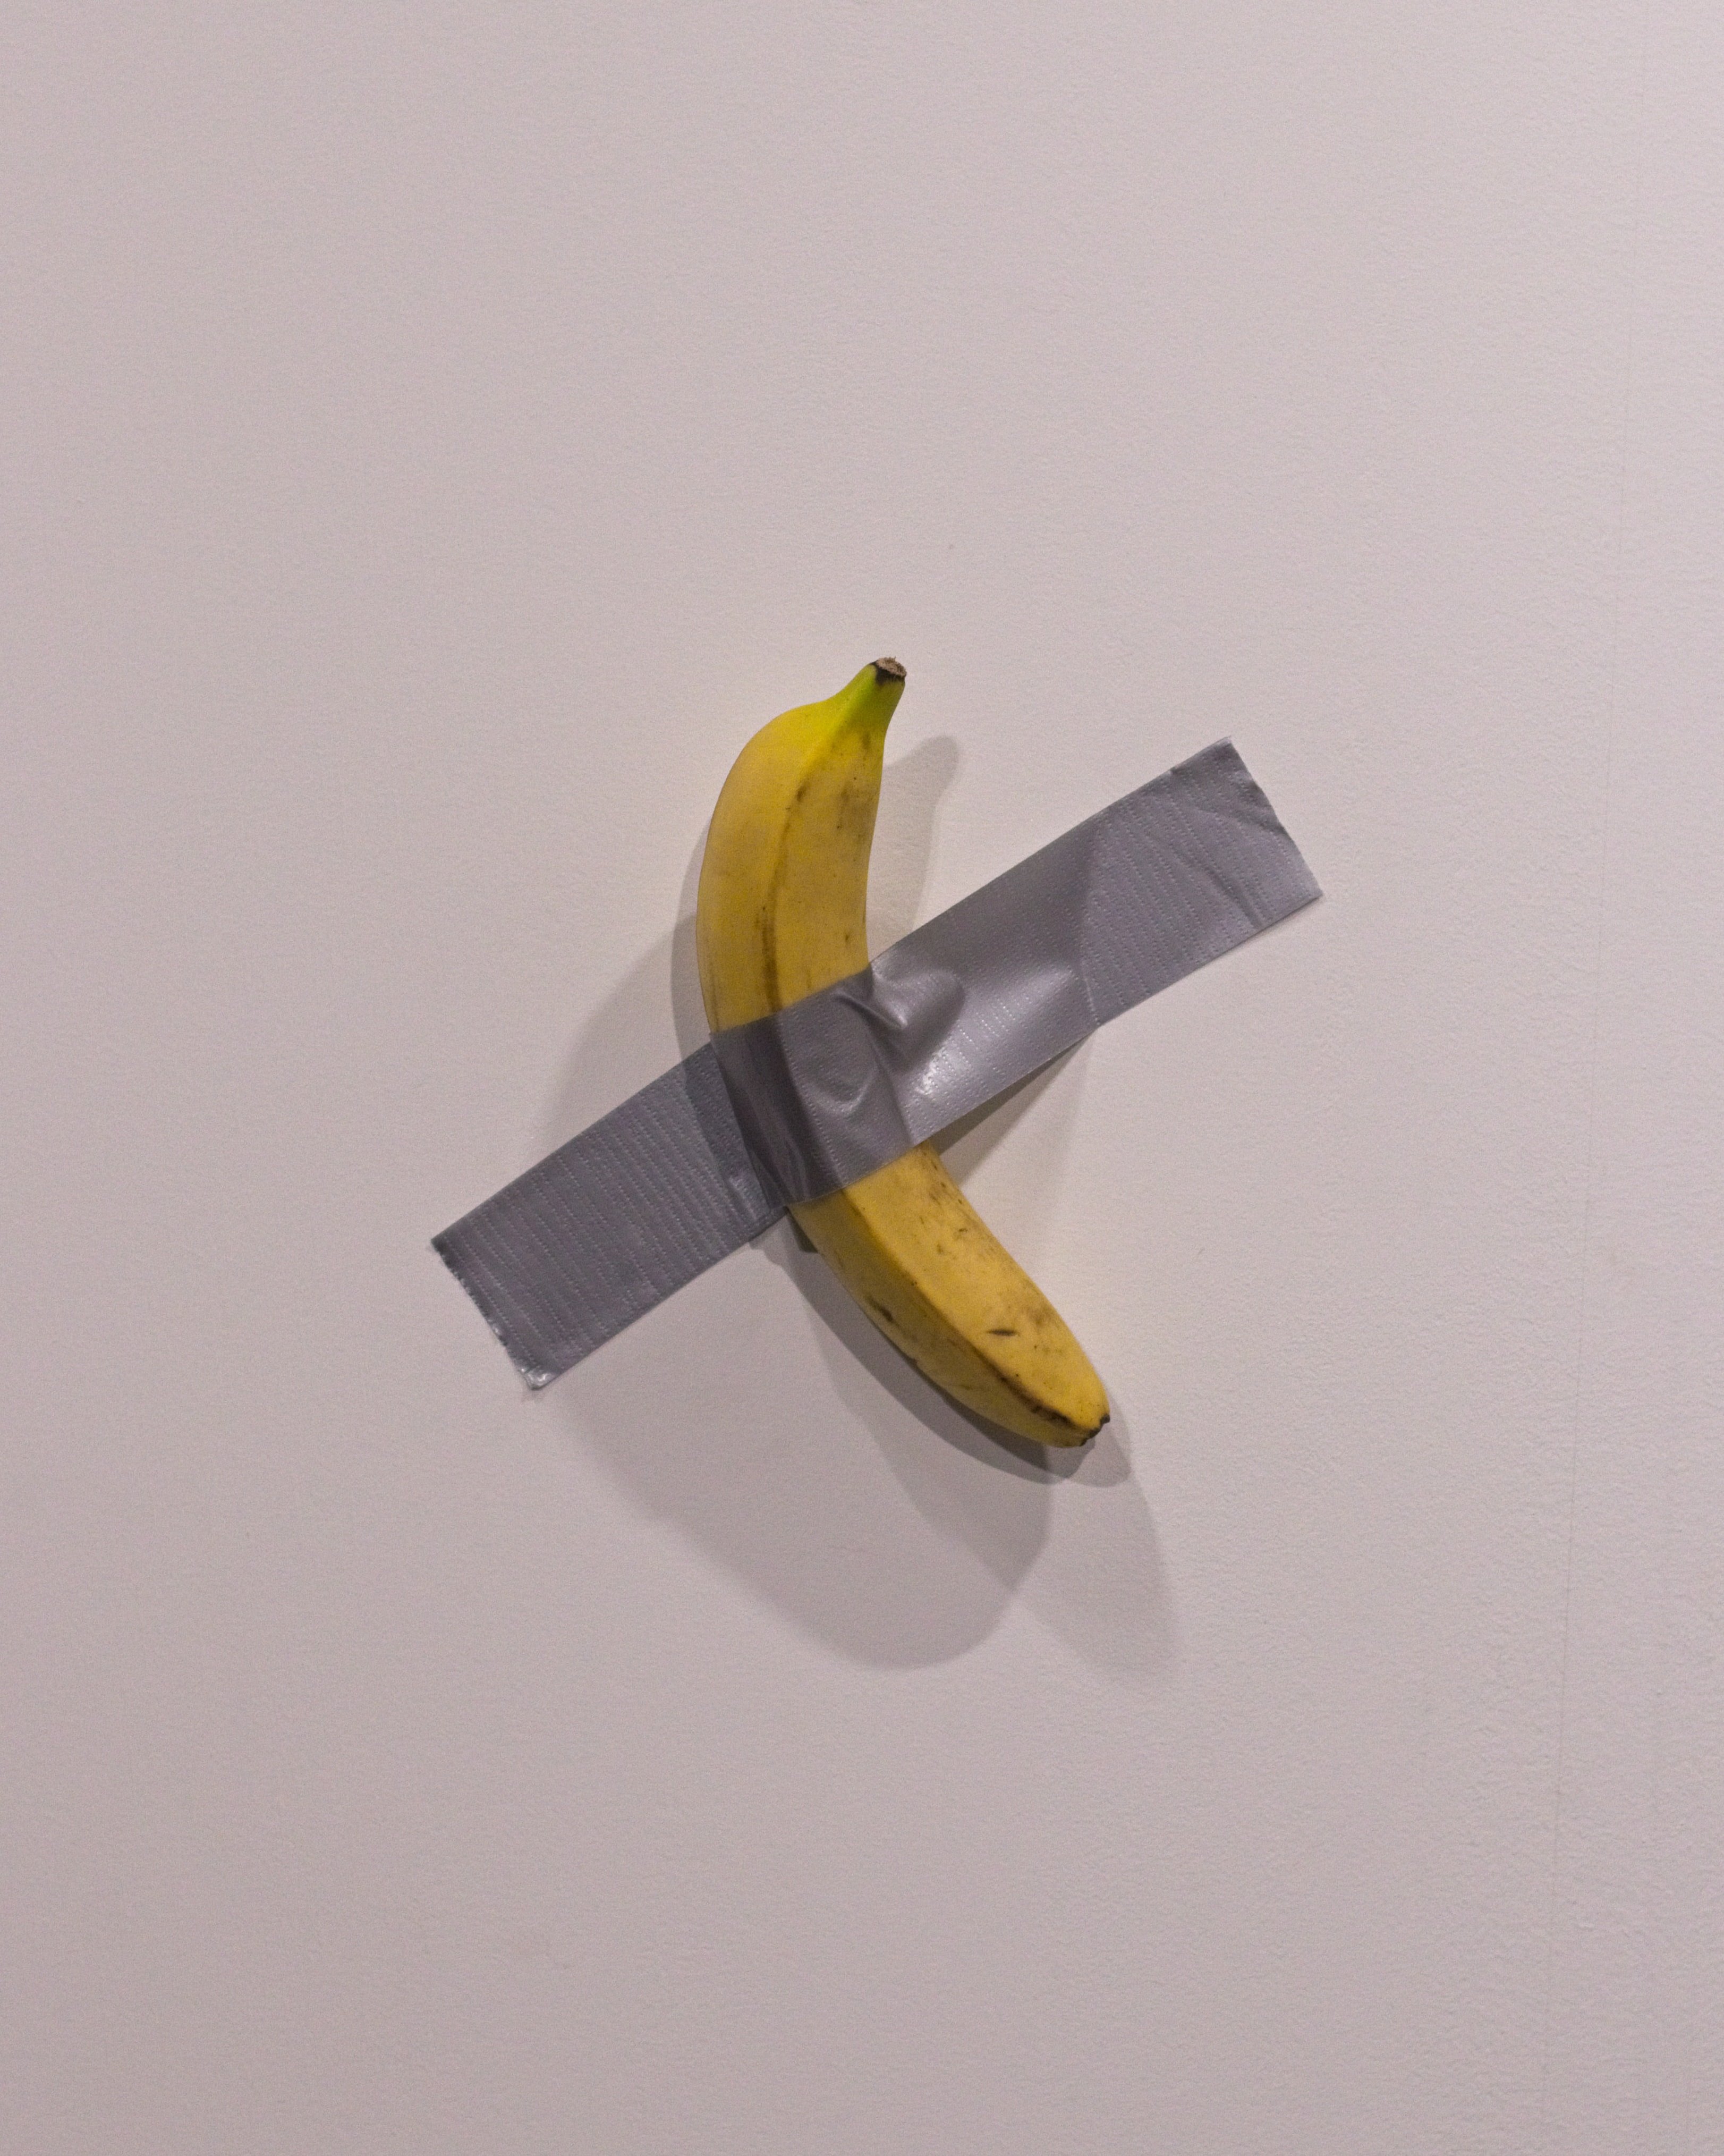 there's supposed to be a banana here, guess you're just super unlucky, huh?